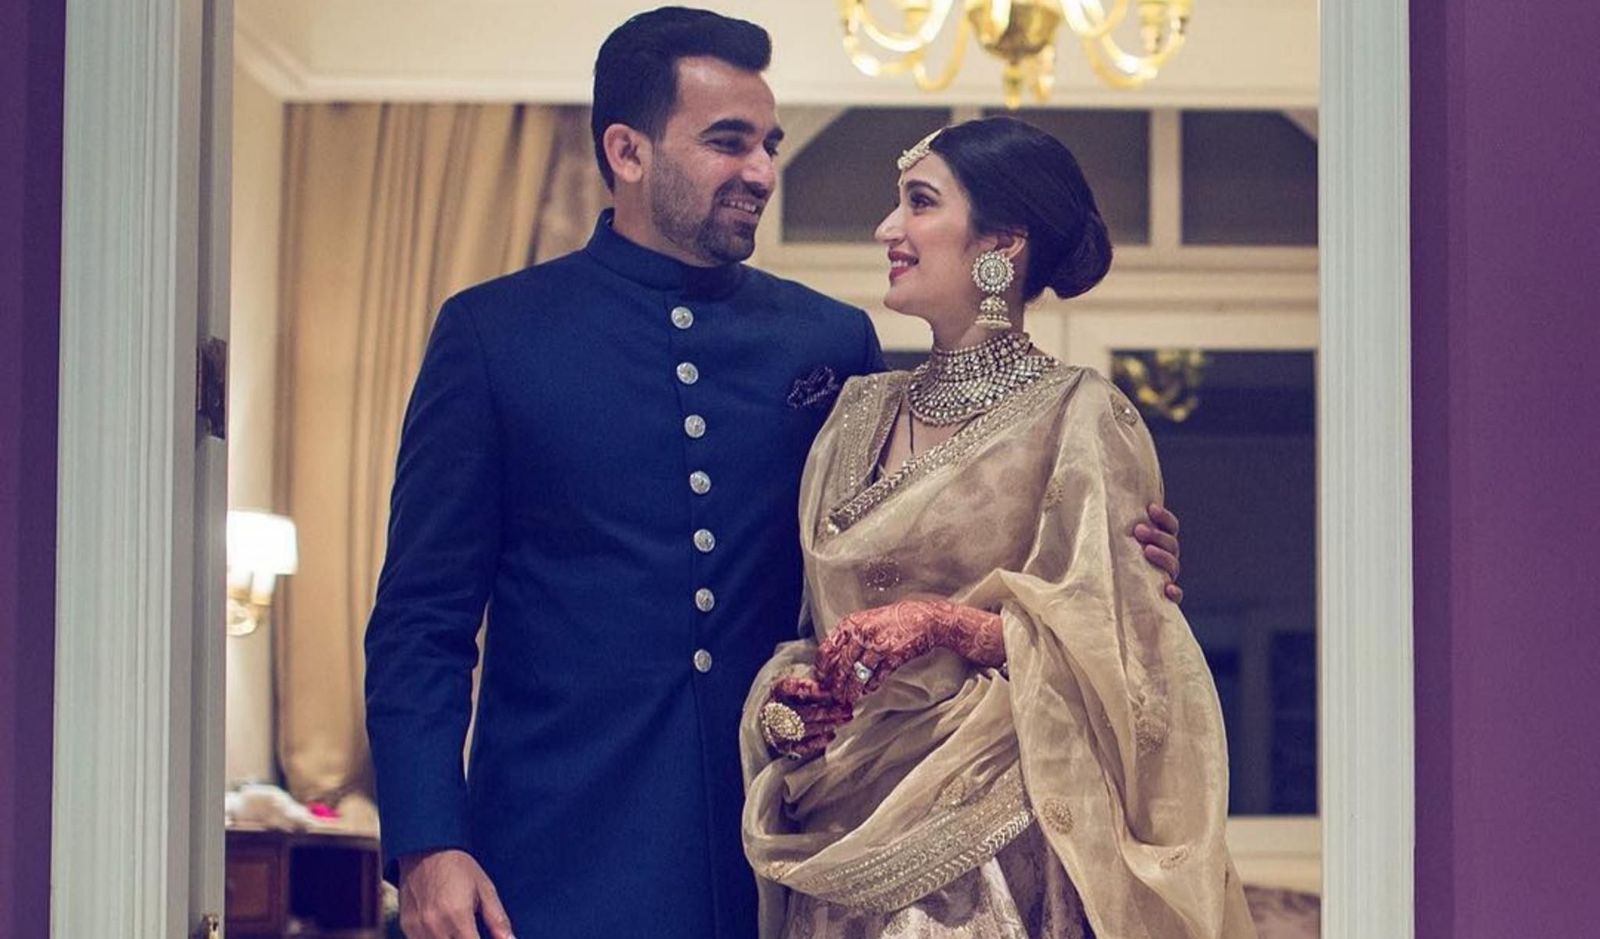 Sagarika Ghatge And Zaheer Khan Expecting Their First Child Together? Here's What You Need To know